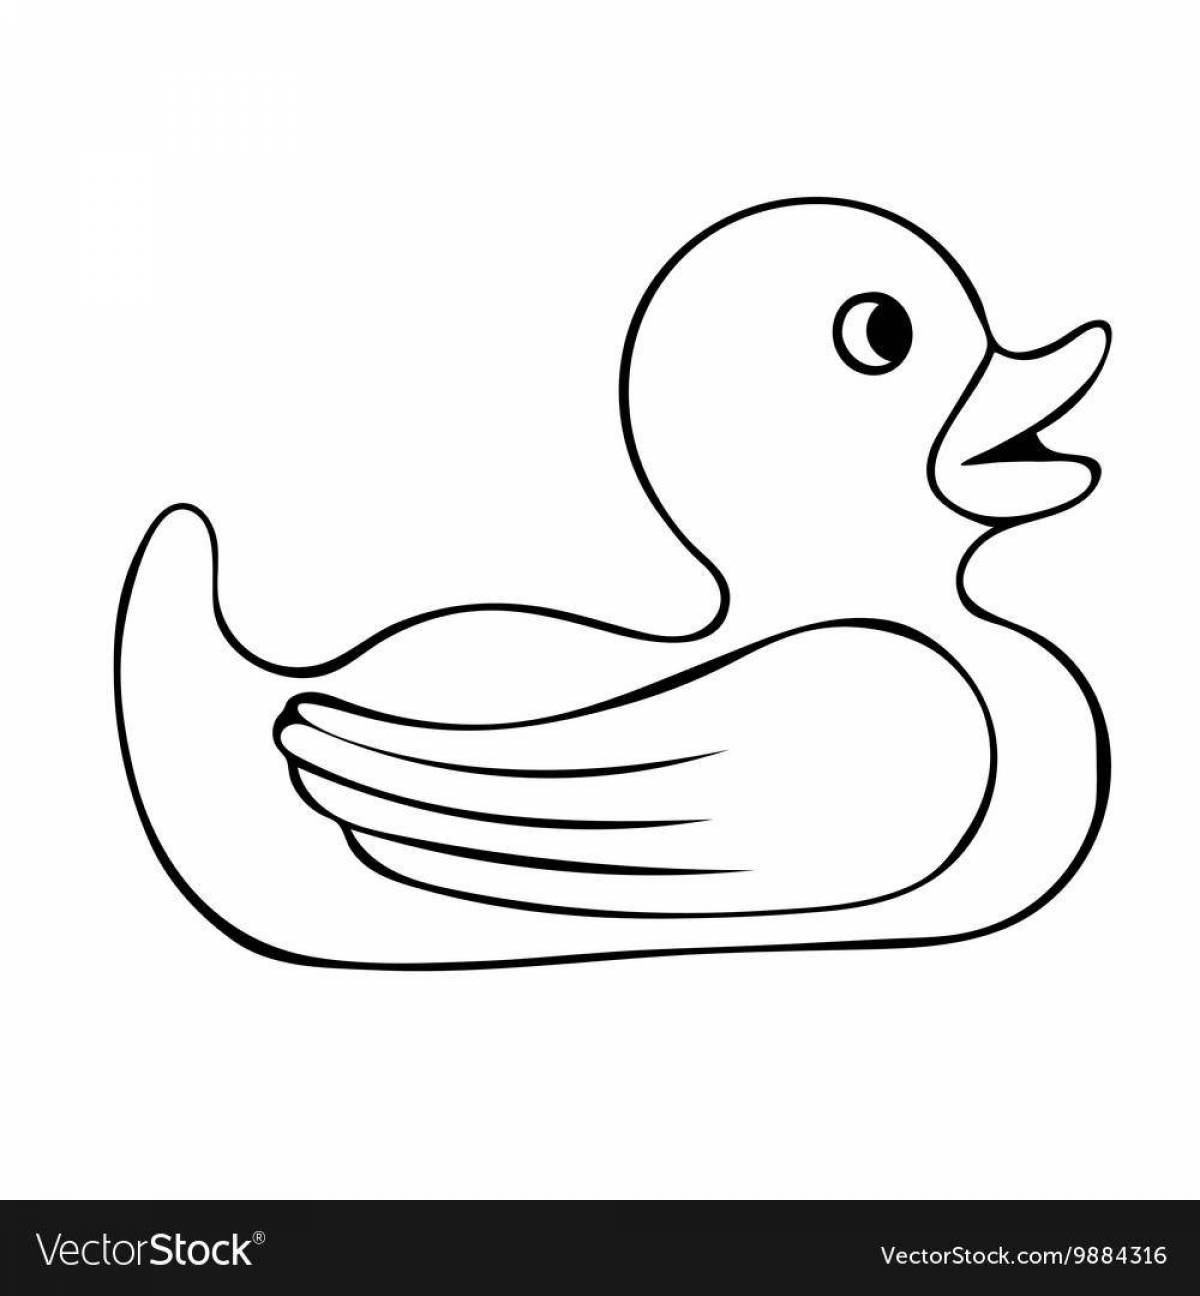 Bright Dymkovo duck coloring book for young children